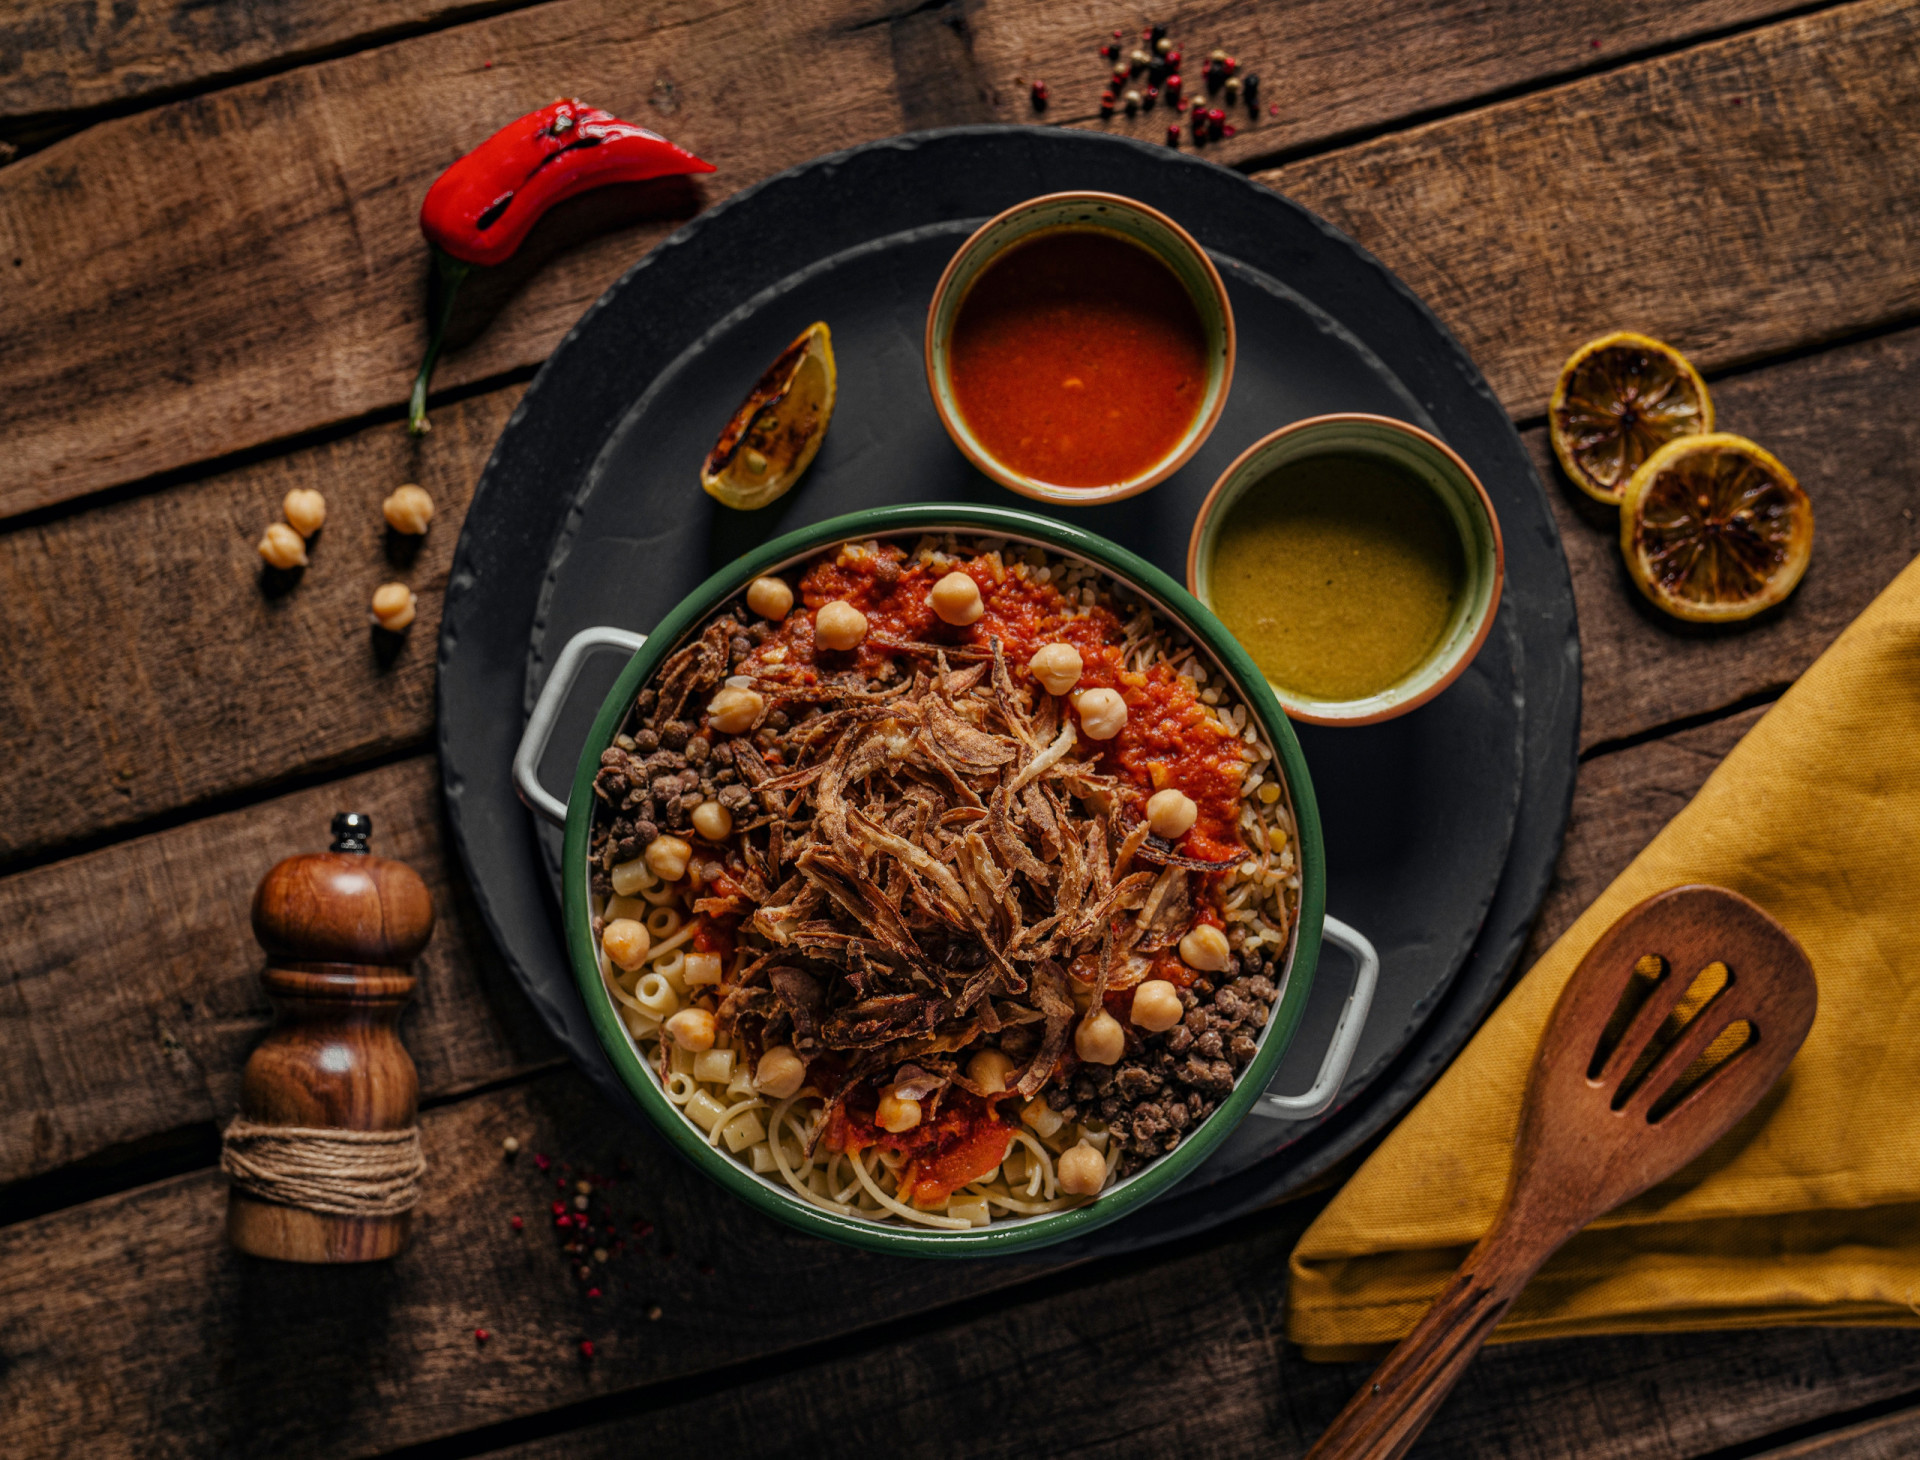 <p><span>Koshari is a simple</span><span> yet hearty street food dish made with layers of rice, lentils, pasta, spicy tomato sauce, and chickpeas. Top with fried onions and garlic.</span></p> <p><span>Sources: (CNN) (African Bites) (Good Food) (Lonely Planet)</span></p> <p><span>See also: <a href="https://www.starsinsider.com/food/422473/must-try-street-food-for-travelers">Must-try street food for travelers</a></span></p>